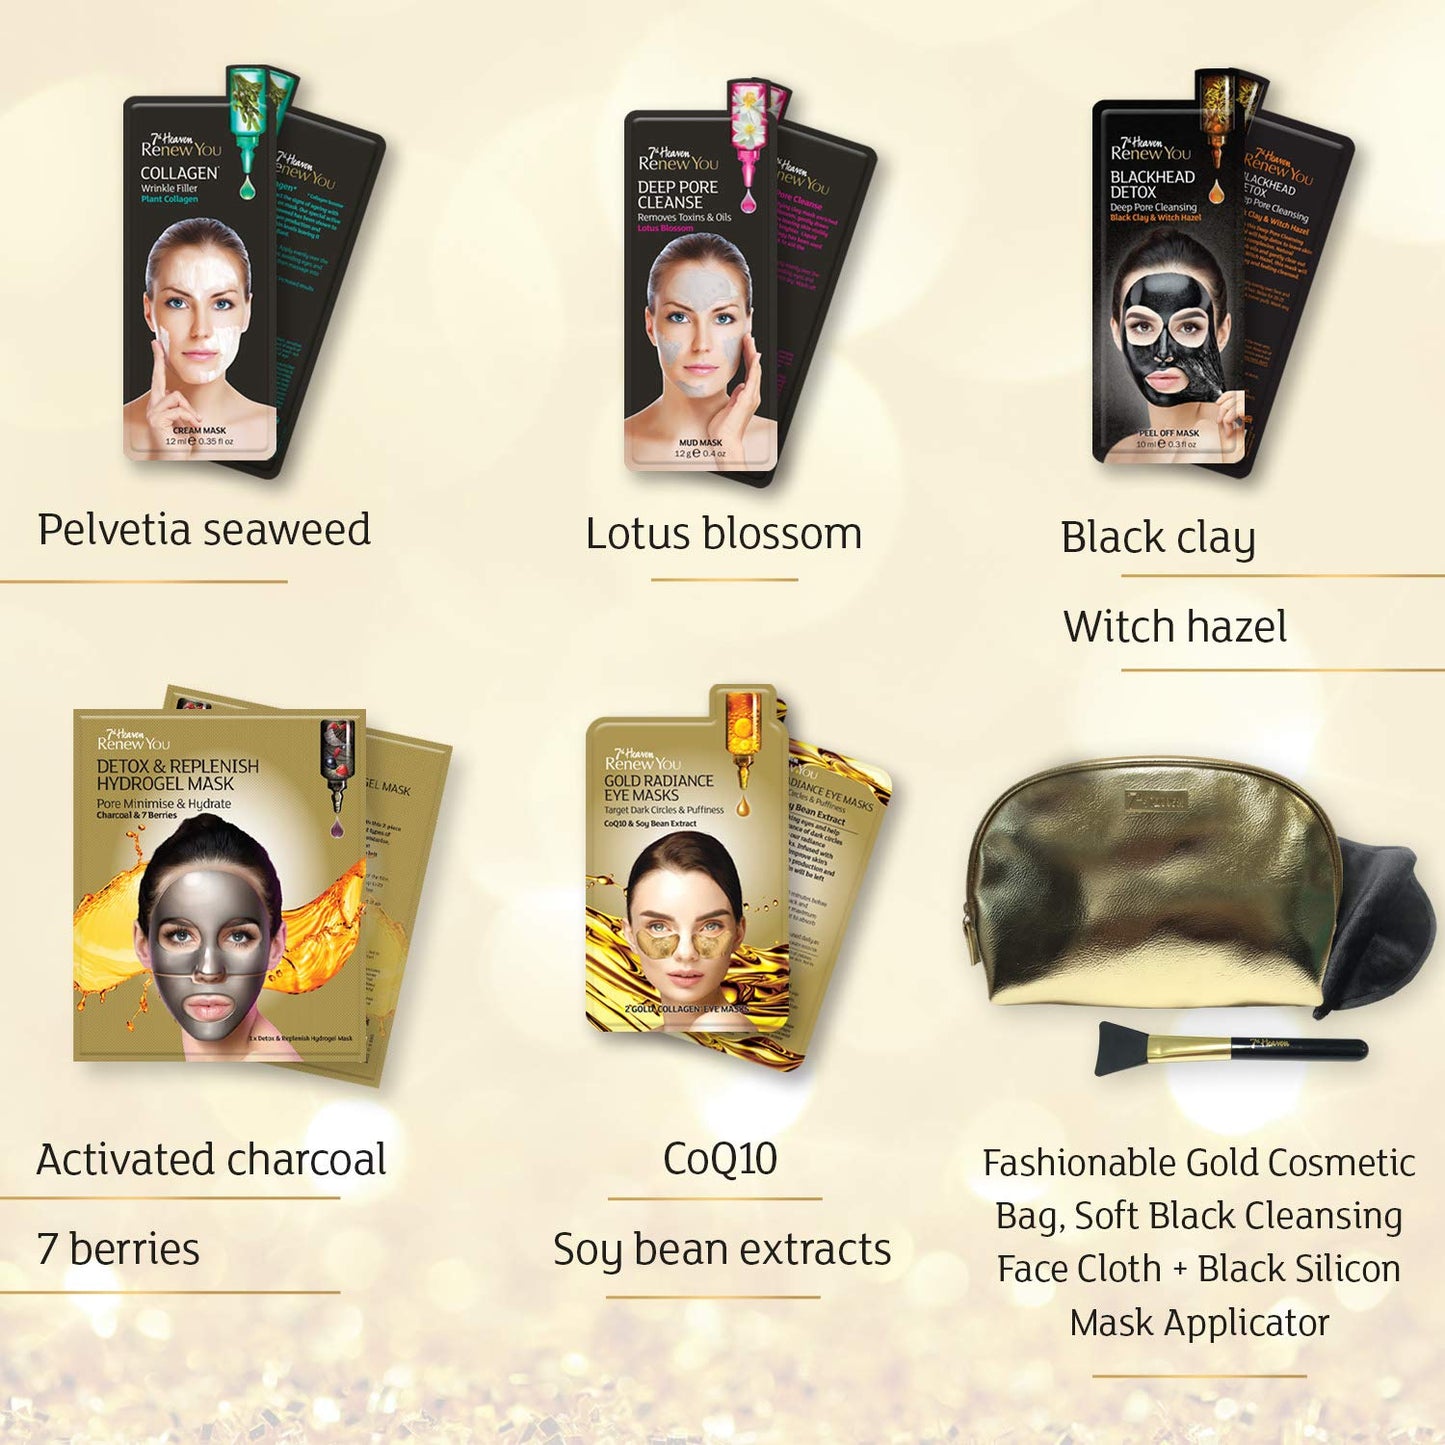 7th Heaven Renew You Pure Indulgence Gift Set - Includes a Variety of Renew You Masks with Gold Cosmetics Bag, Soft Black Cleansing Face Cloth and Black Silicon Mask Applicator